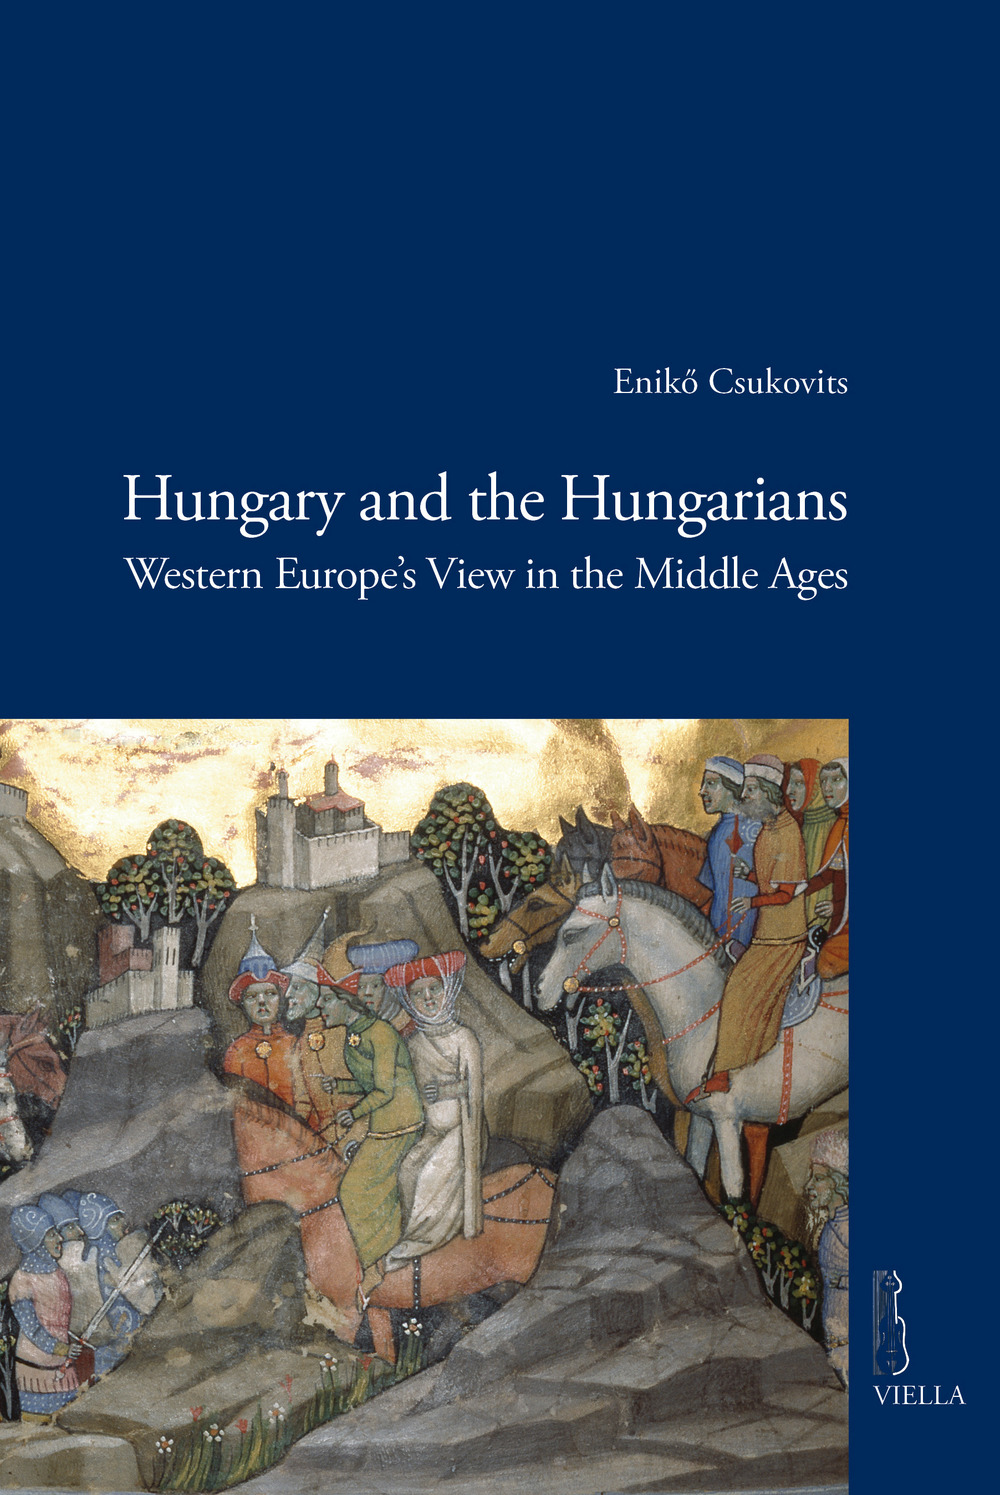 Hungary and the hungarians. Western Europe's view in the middle ages